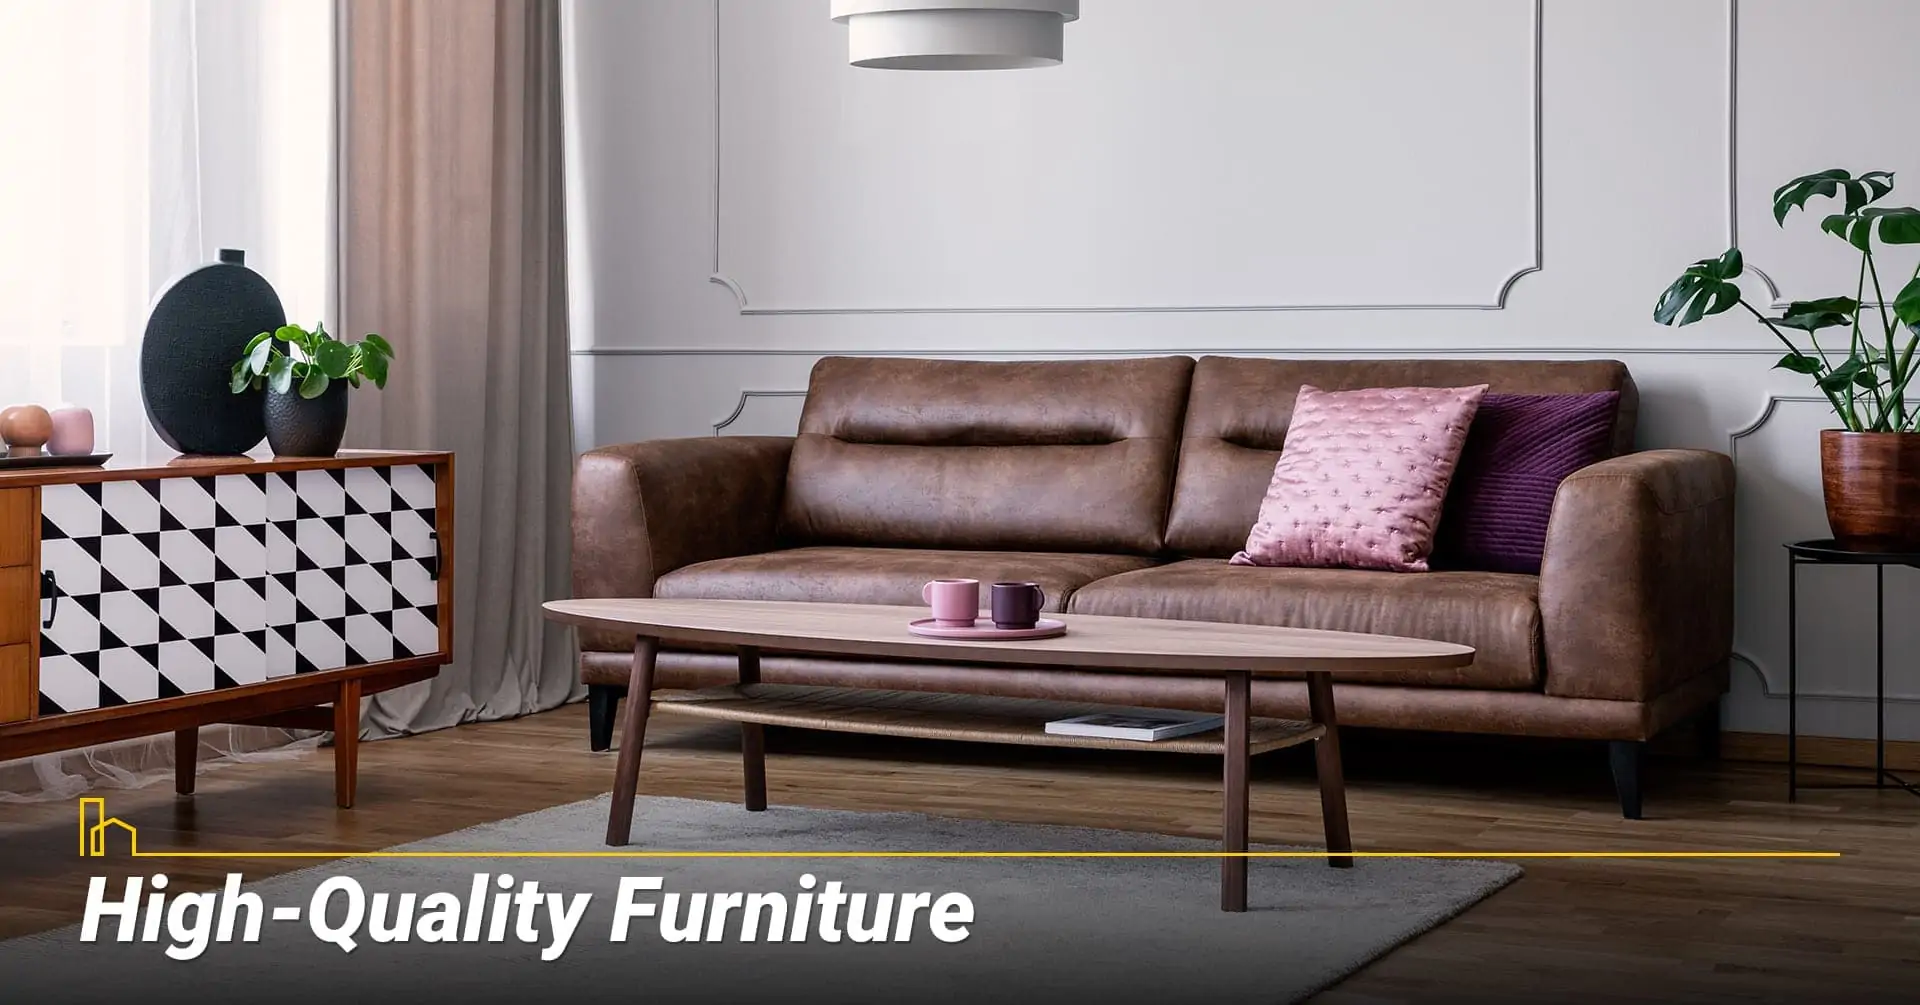 High-Quality Furniture, upgrade with quality furniture